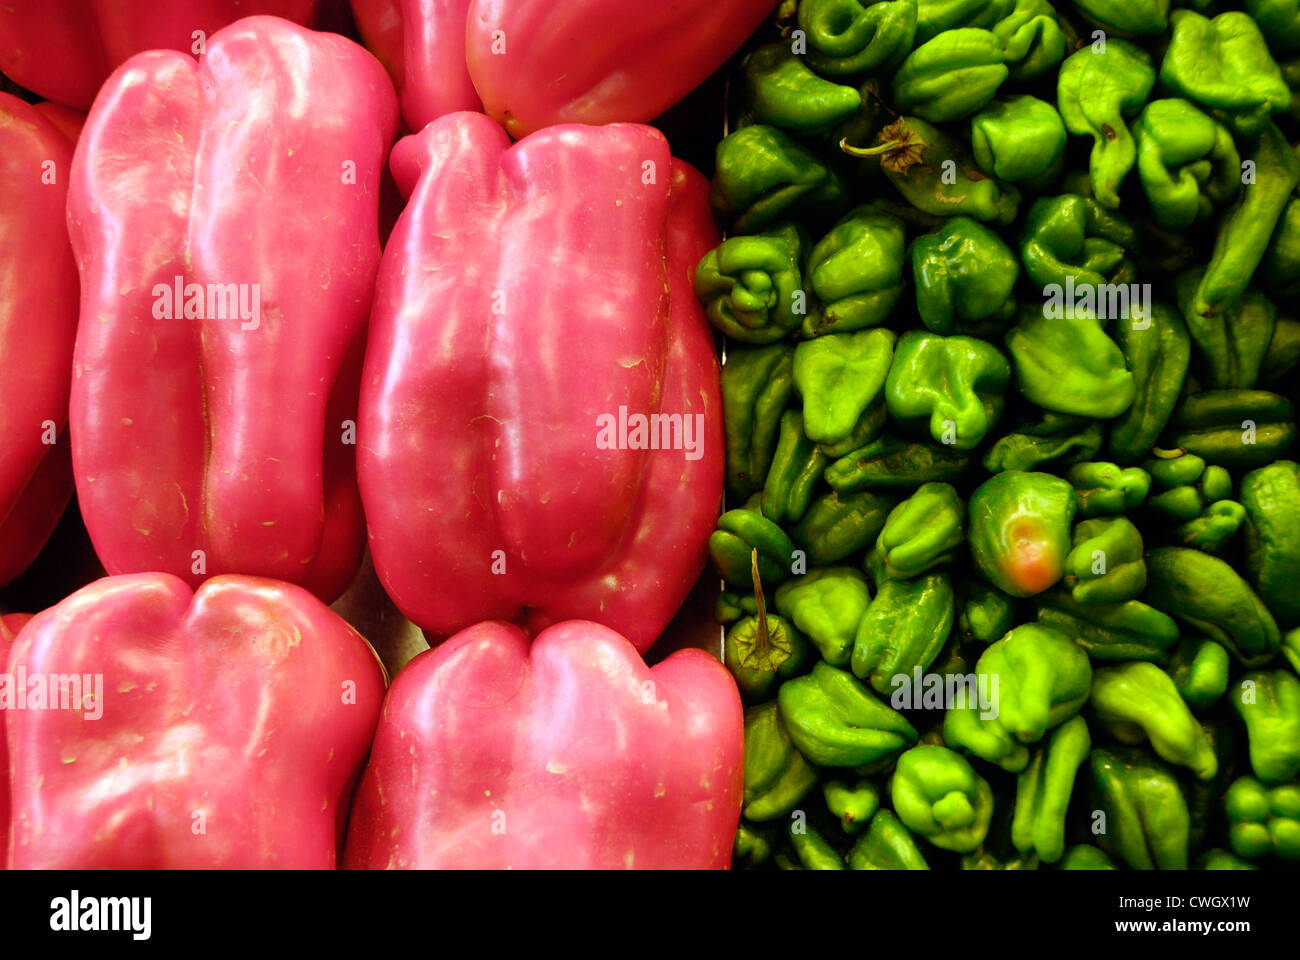 red peppers green Scotch Bonnet peppers on sale in Spanish market Stock Photo - Alamy